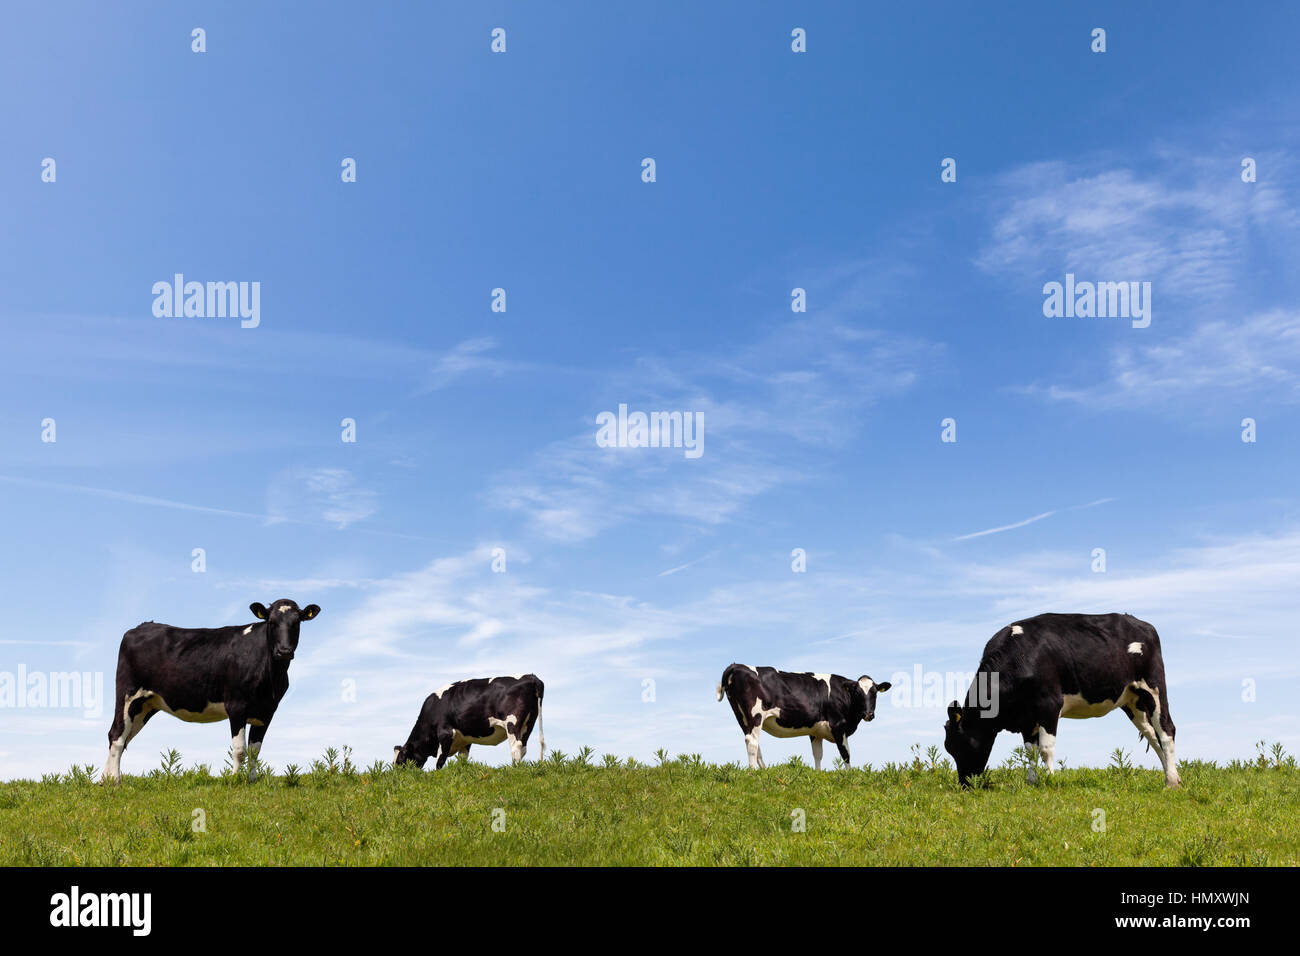 Cattle grazing in a lush green field in the daytime Stock Photo